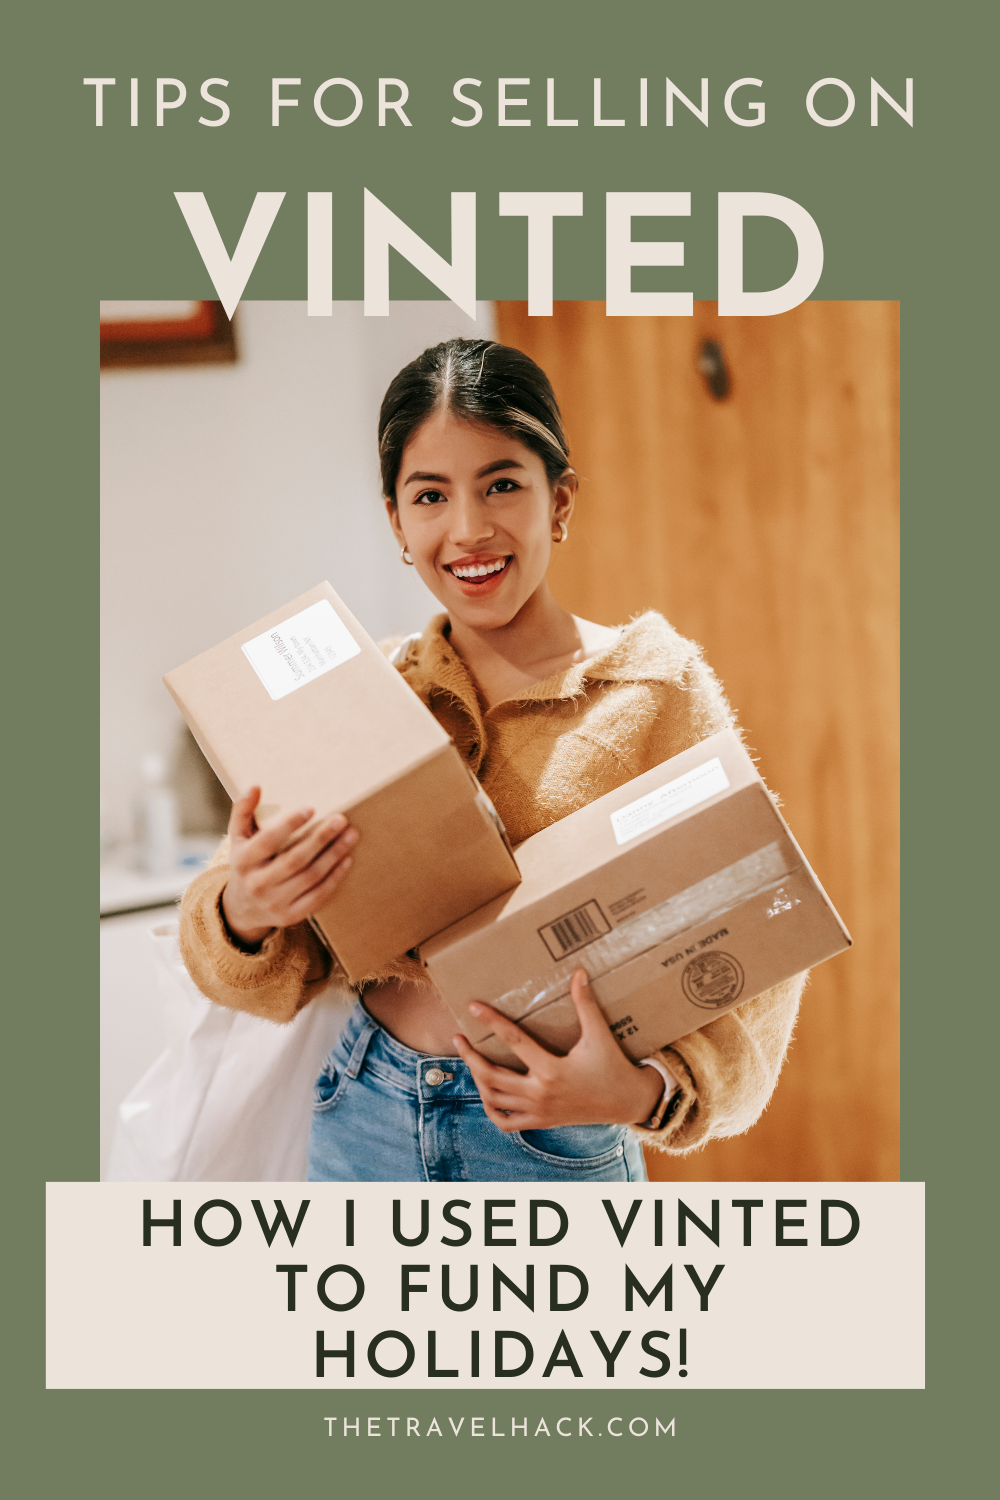 How to sell on Vinted